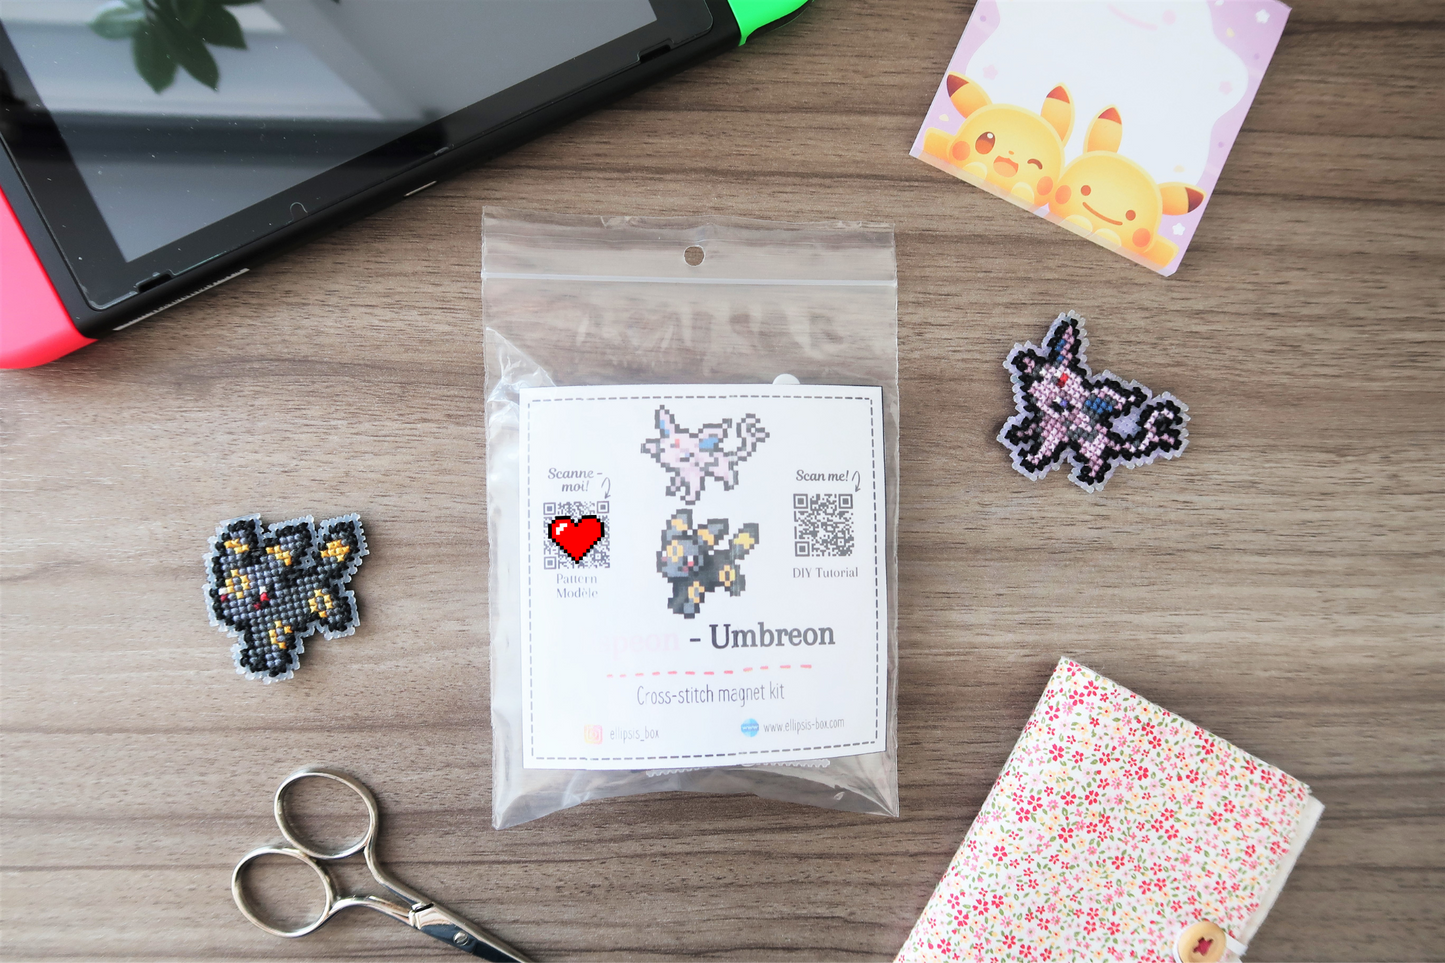 Espeon and Umbreon from Pokemon - Cross stitch magnet kit